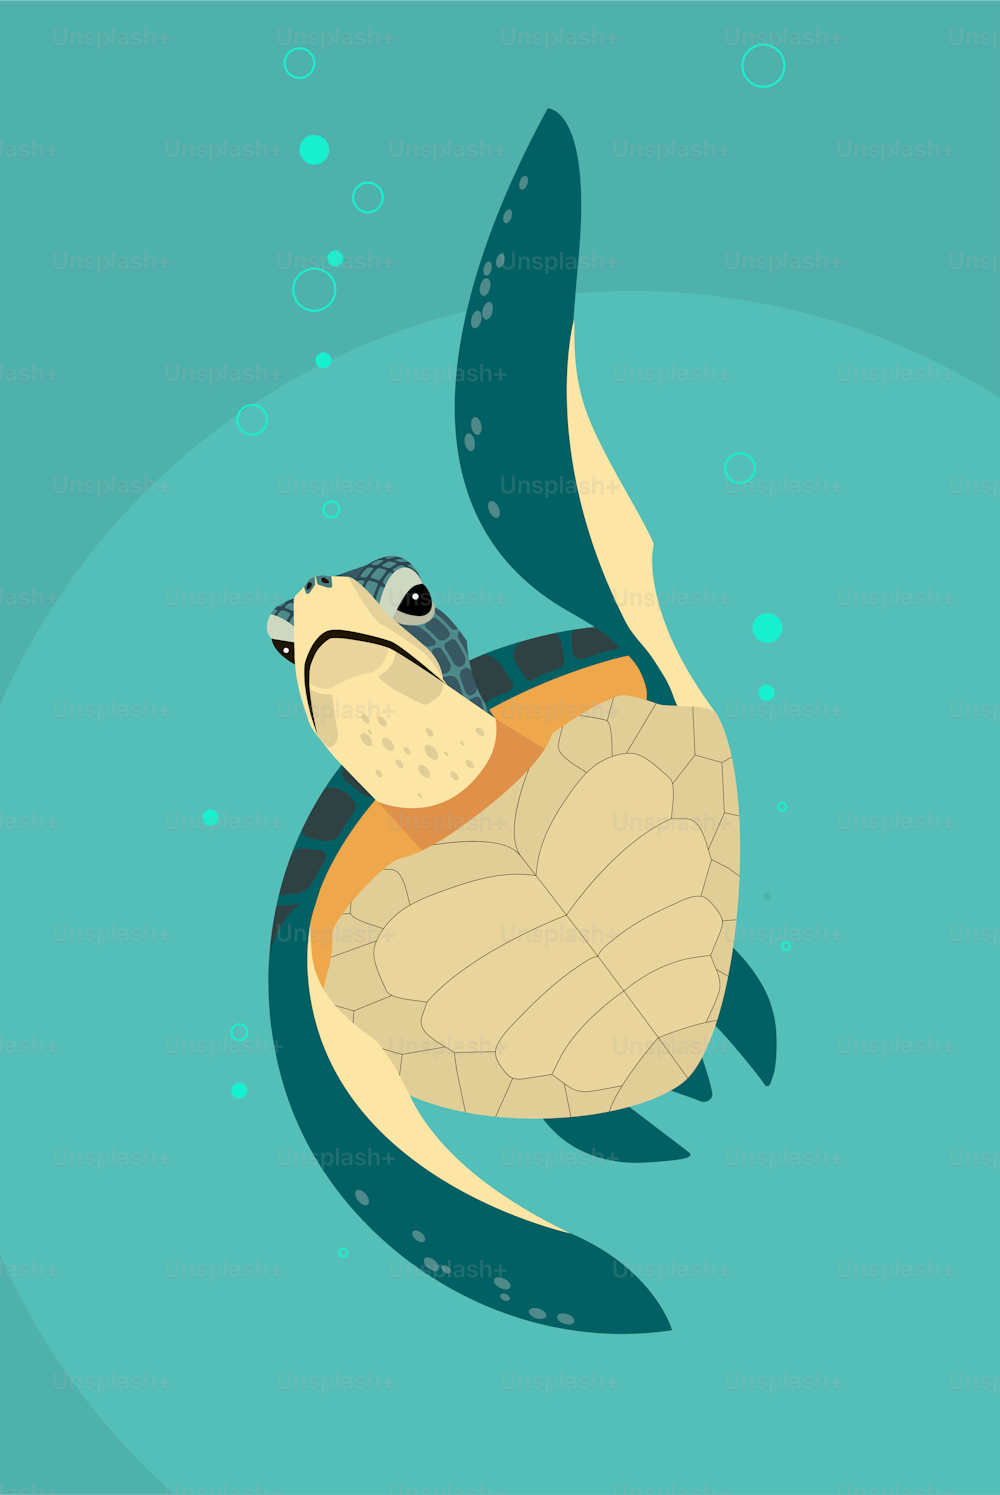 A green and yellow sea turtle rises from the depths of the sea to the surface, stylized image